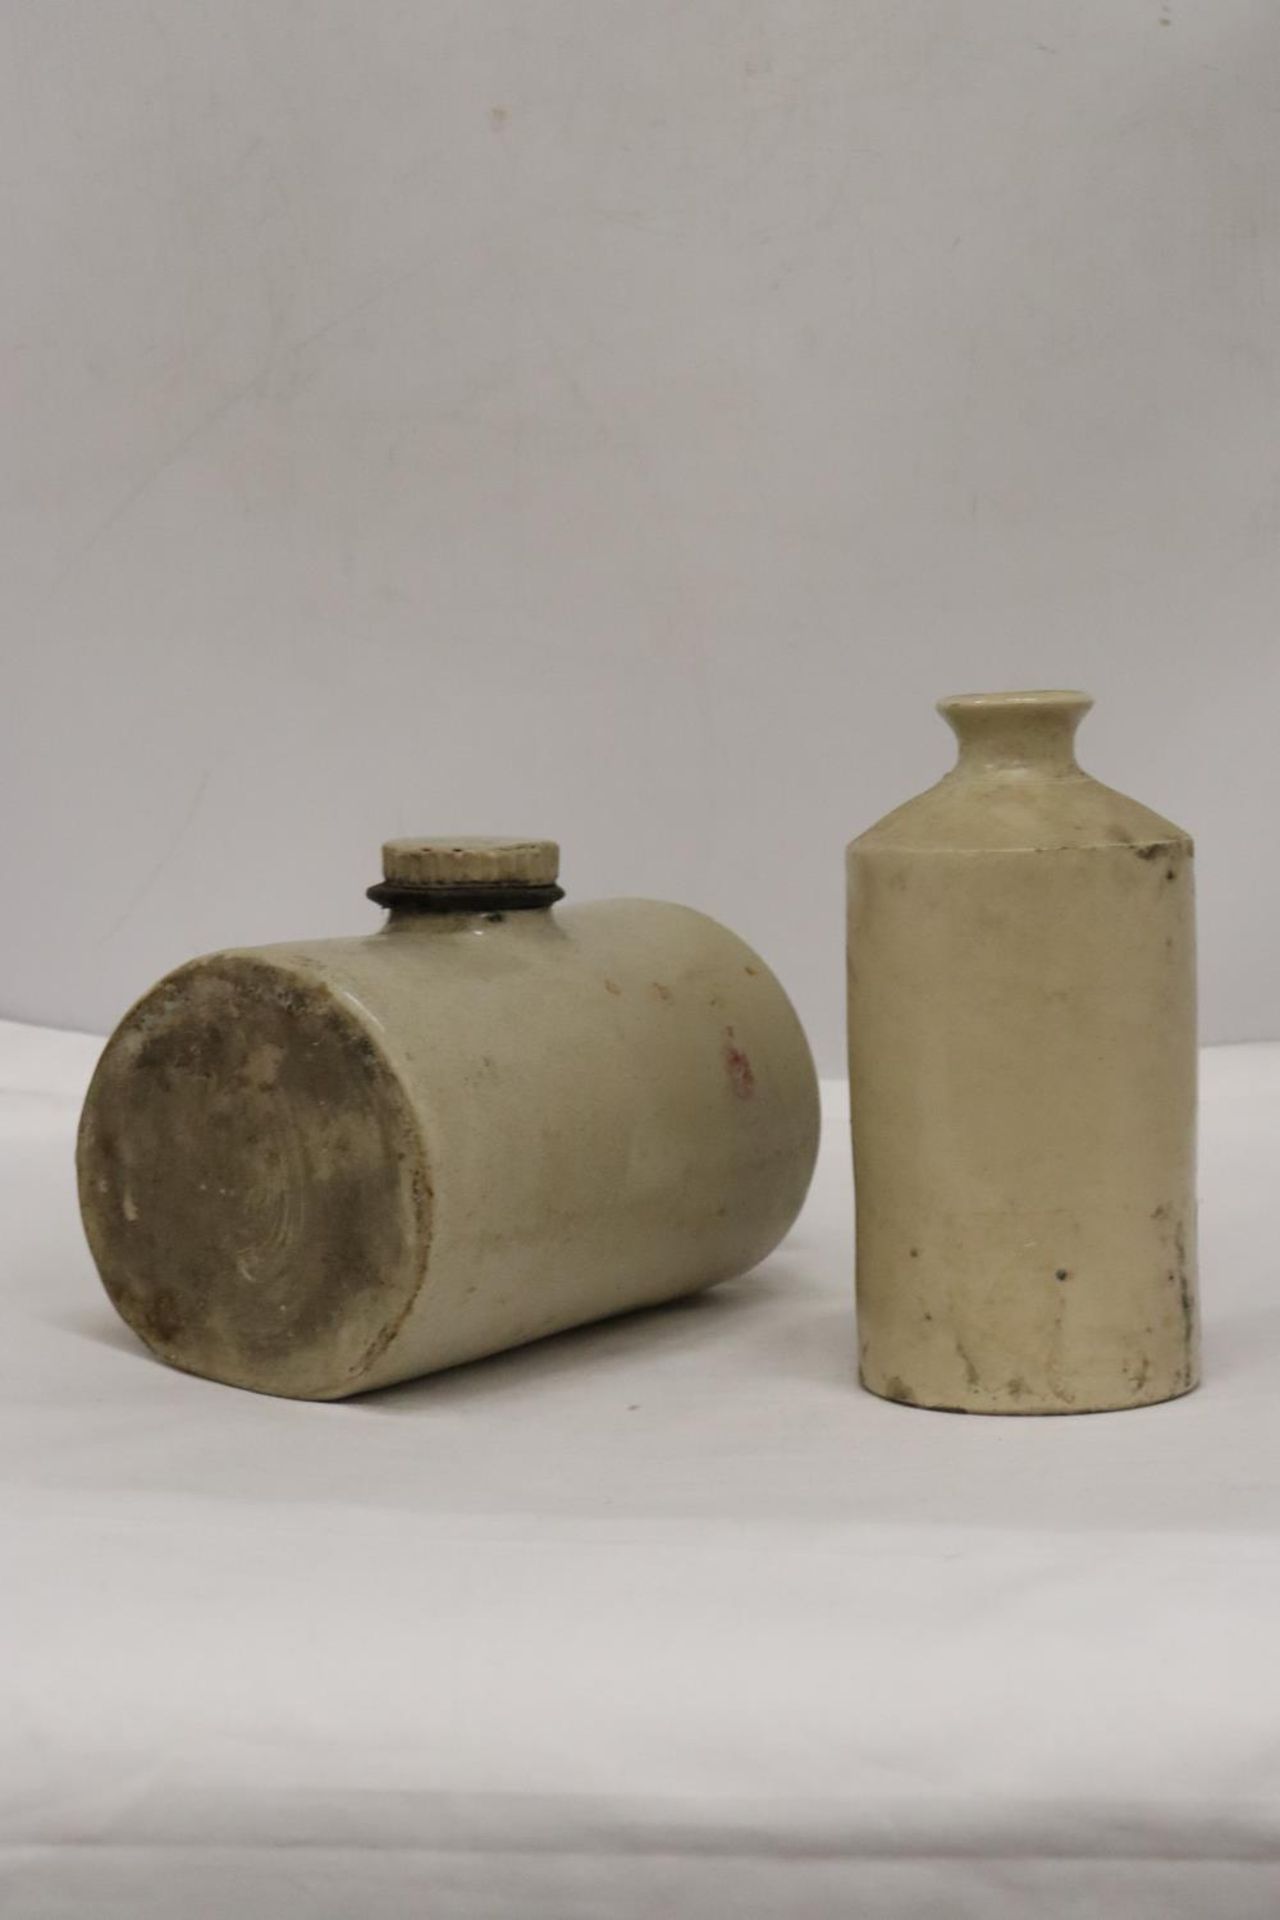 AN ANTIQUE STONEWARE LARGE INK BOTTLE TOGETHER WITH A STONE BED WARMER - Image 3 of 6